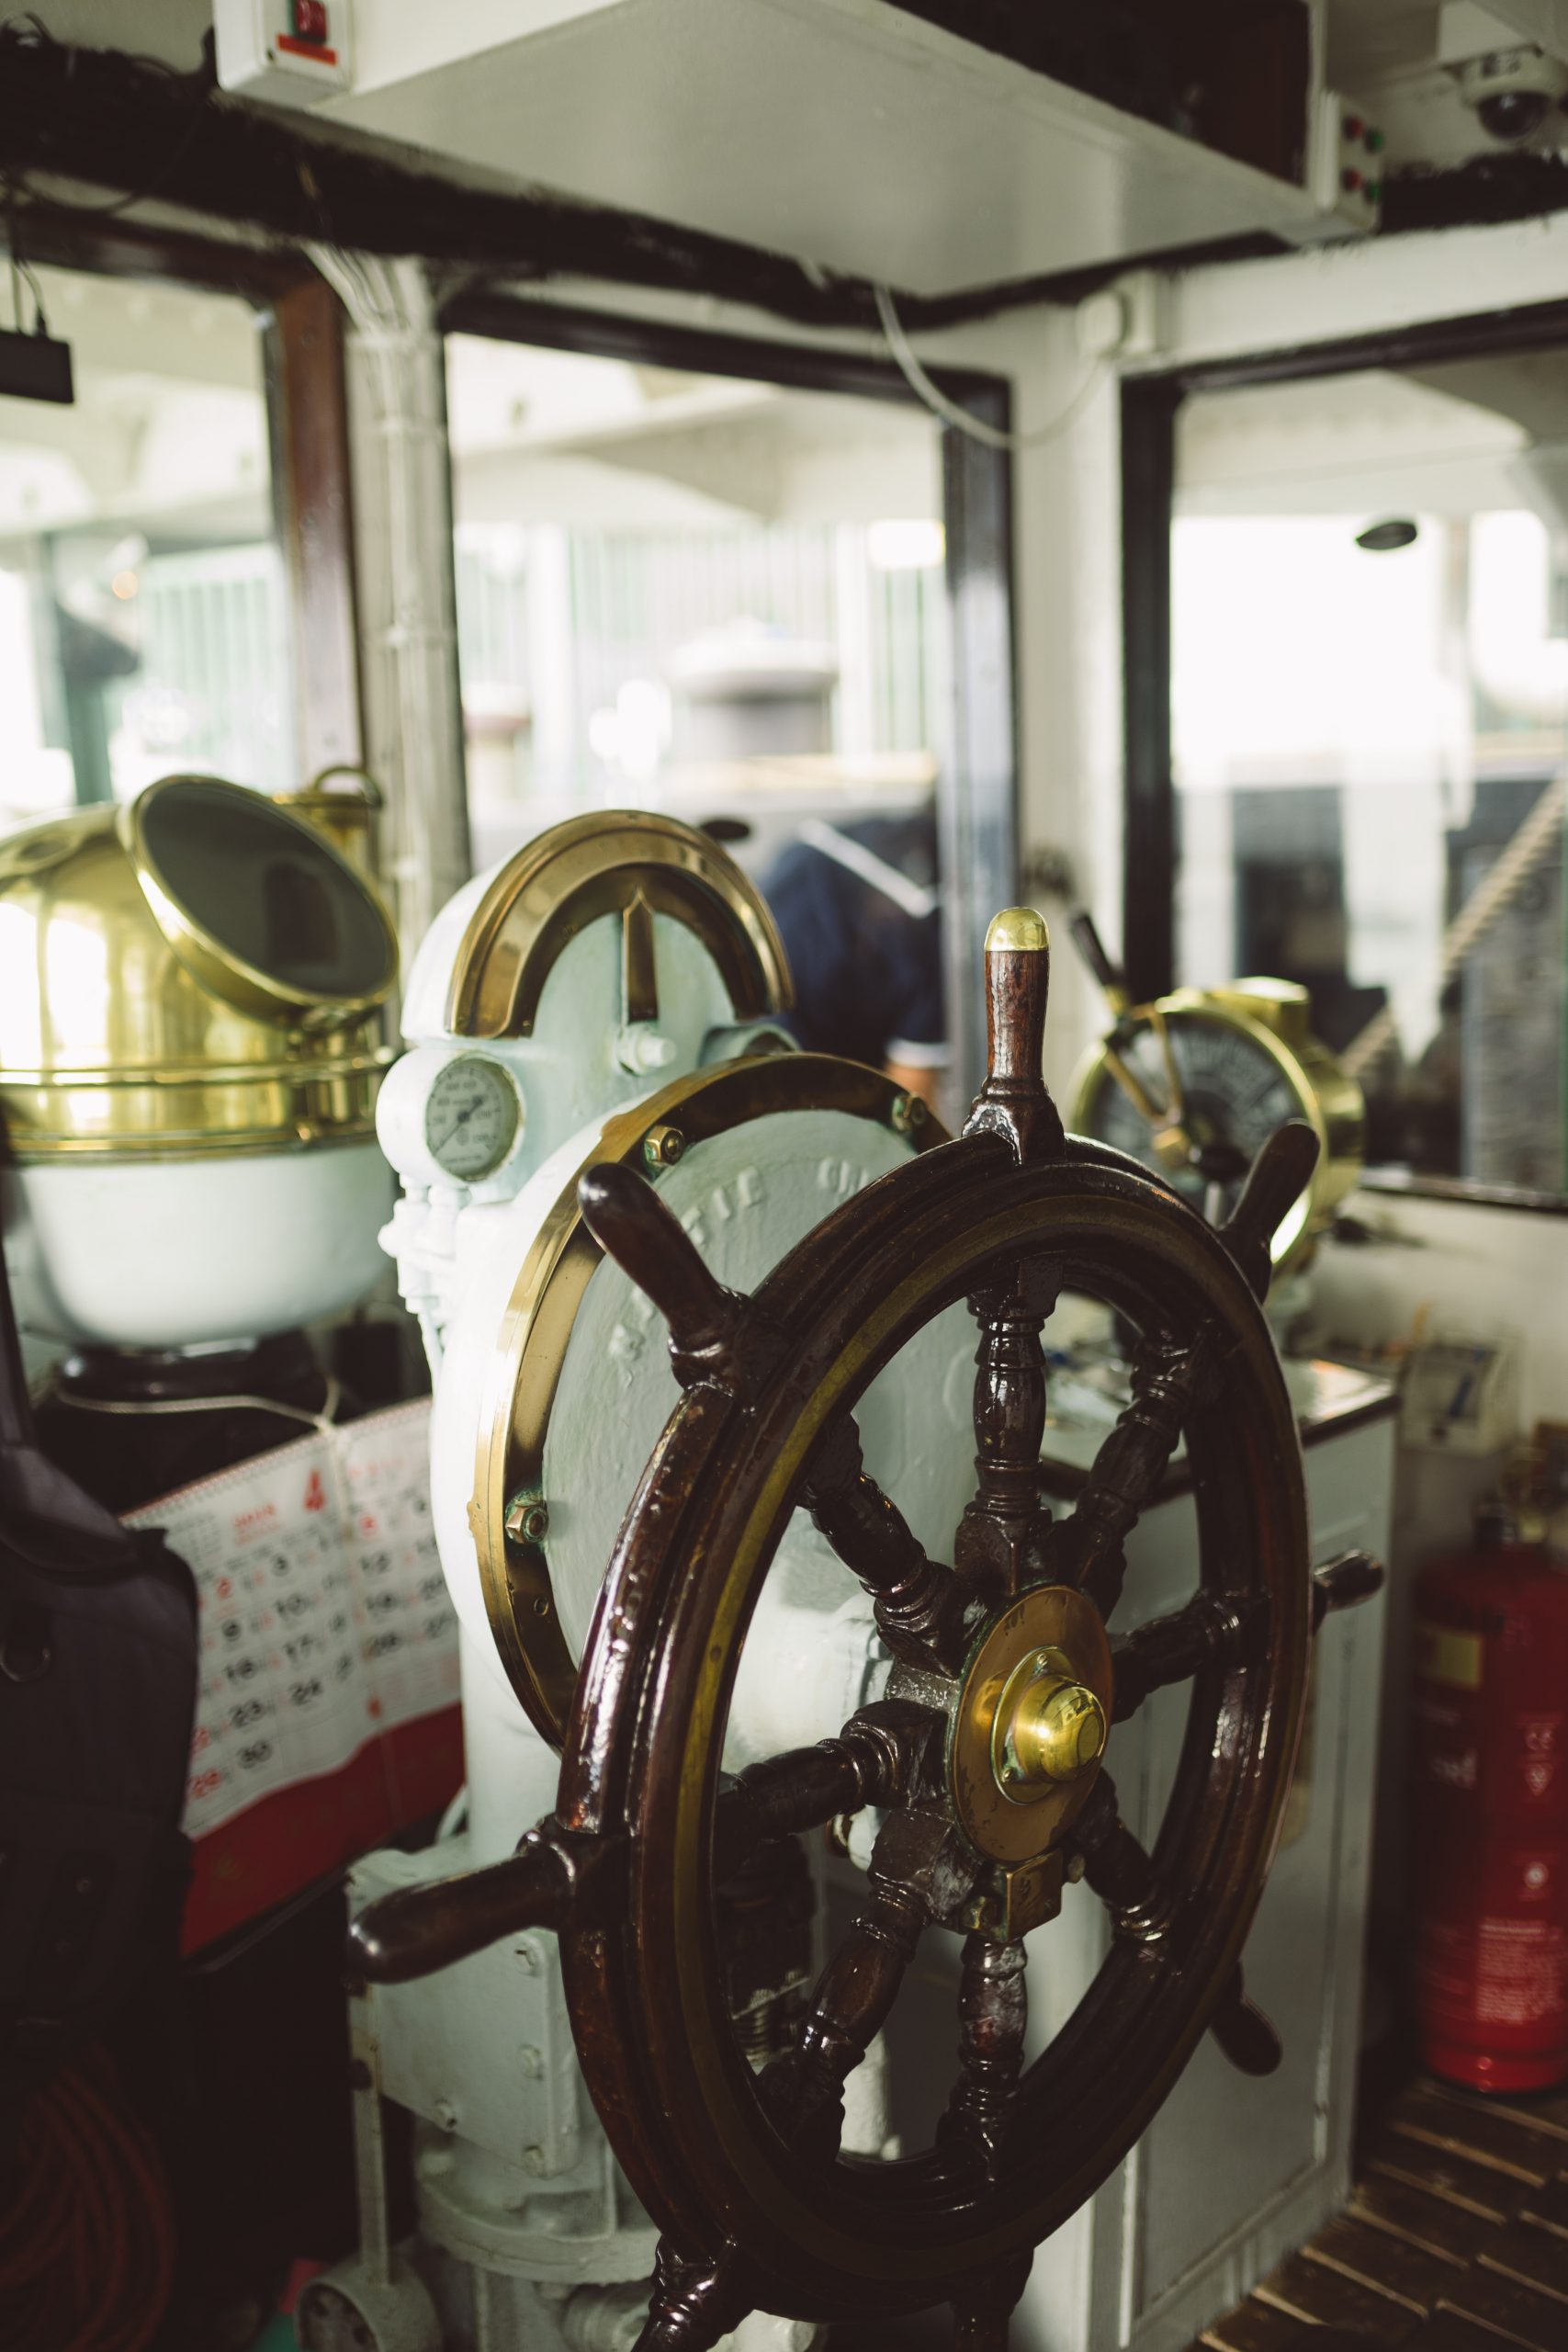 Navigational Devices and Equipment in Bridge of the Ships